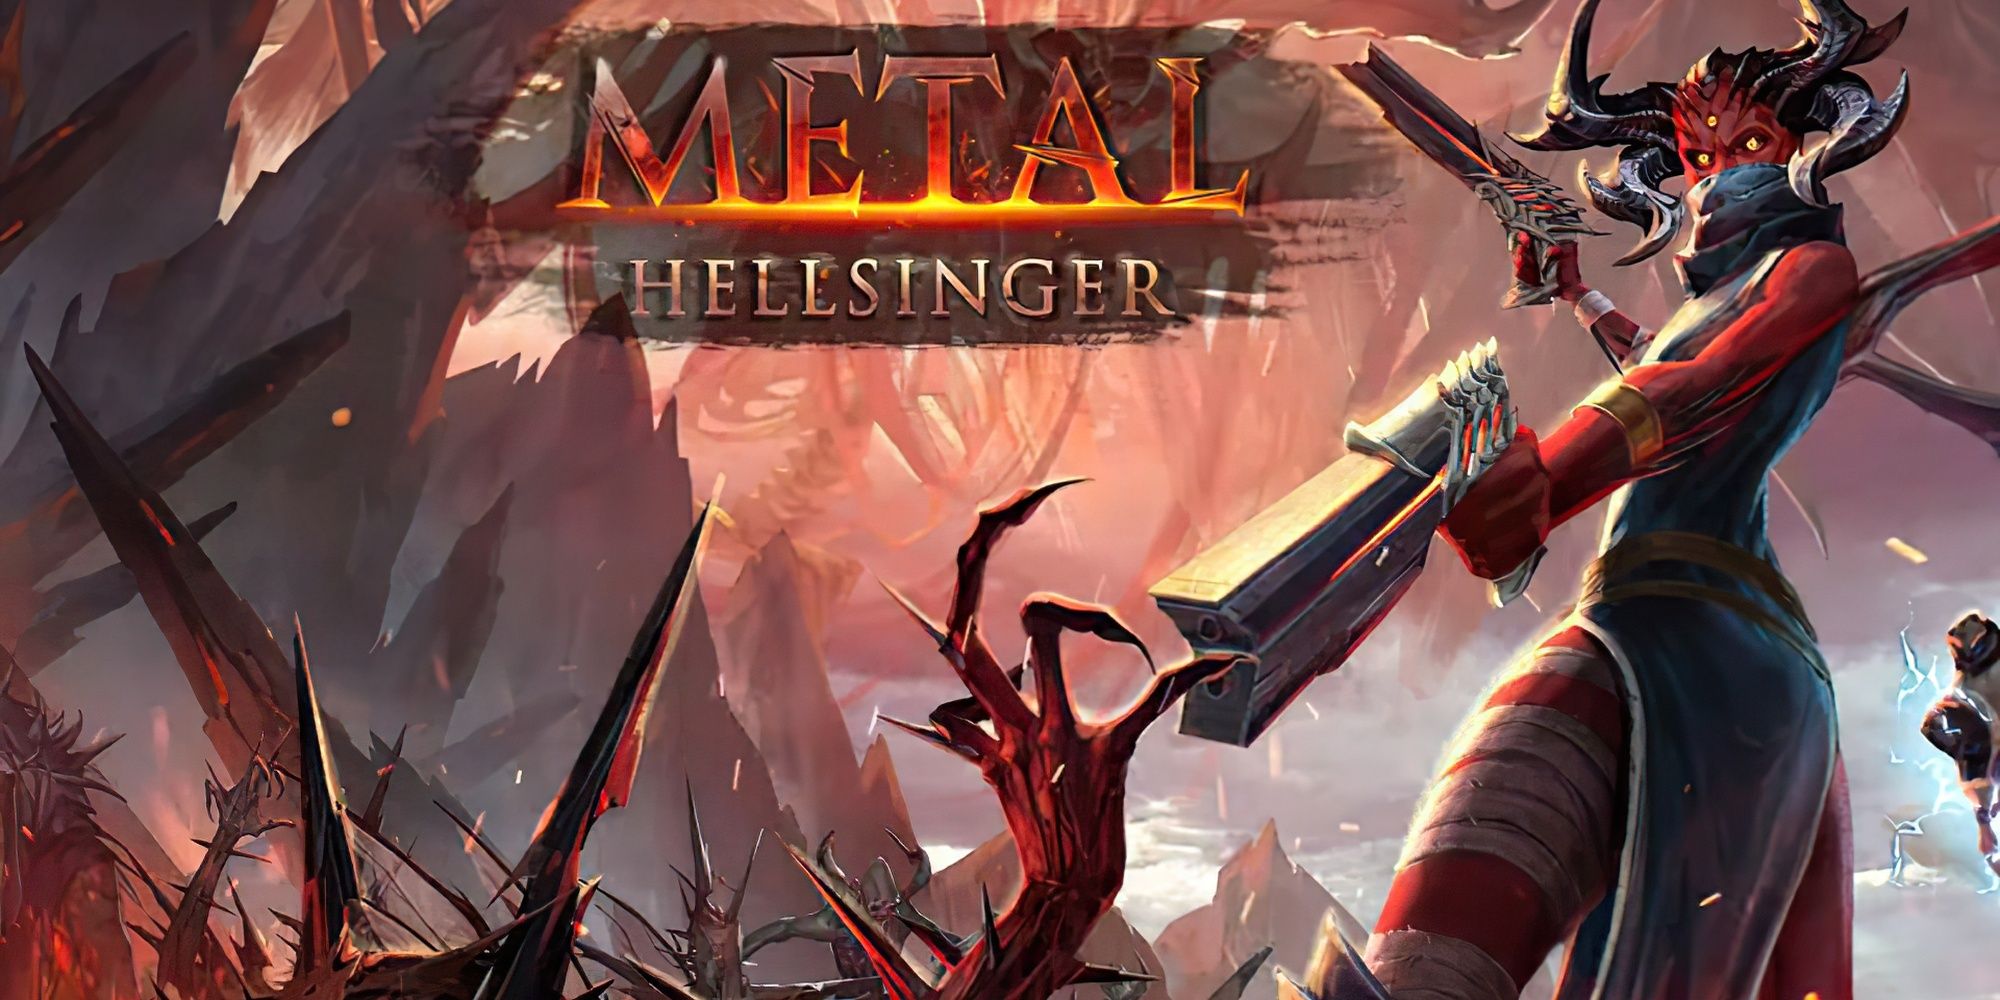 Xbox Game Pass is the Perfect Home for Metal: Hellsinger